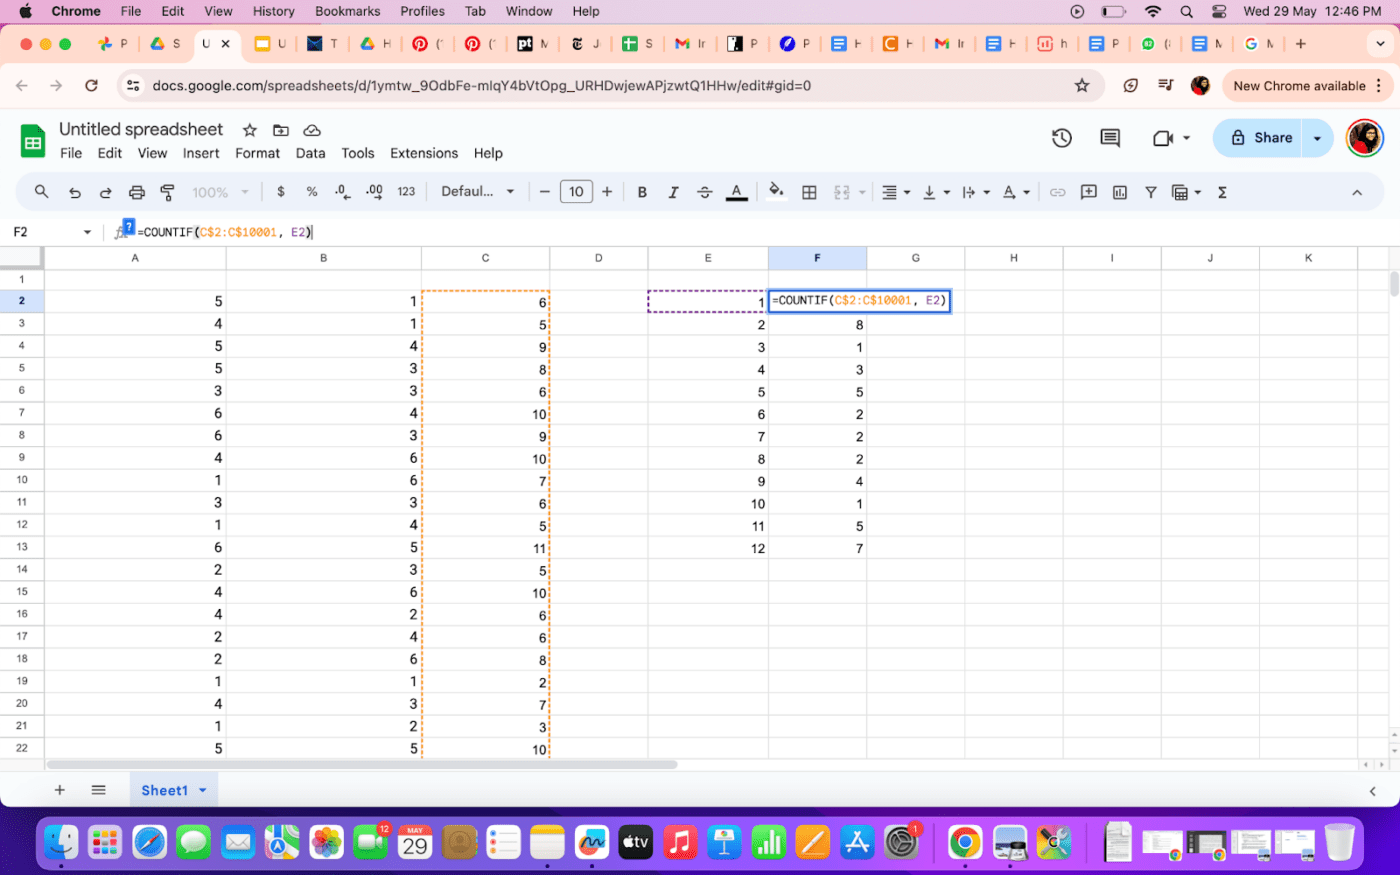 COUNTIF function in spreadsheet